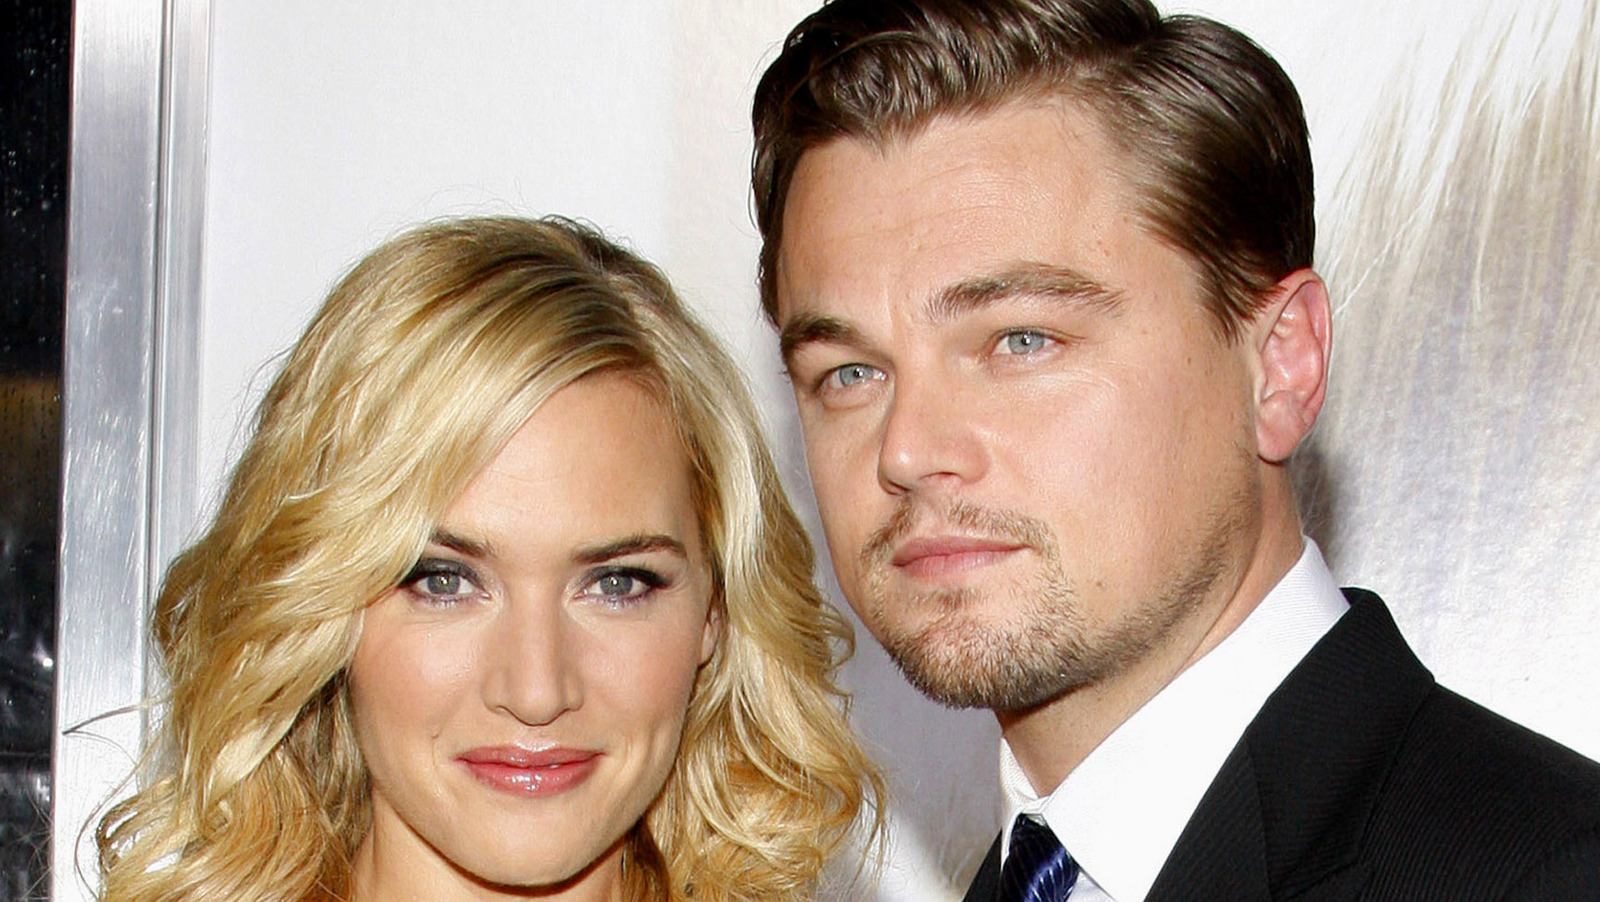 Here's What We Know About Kate Winslet And Leonardo DiCaprio's Relationship